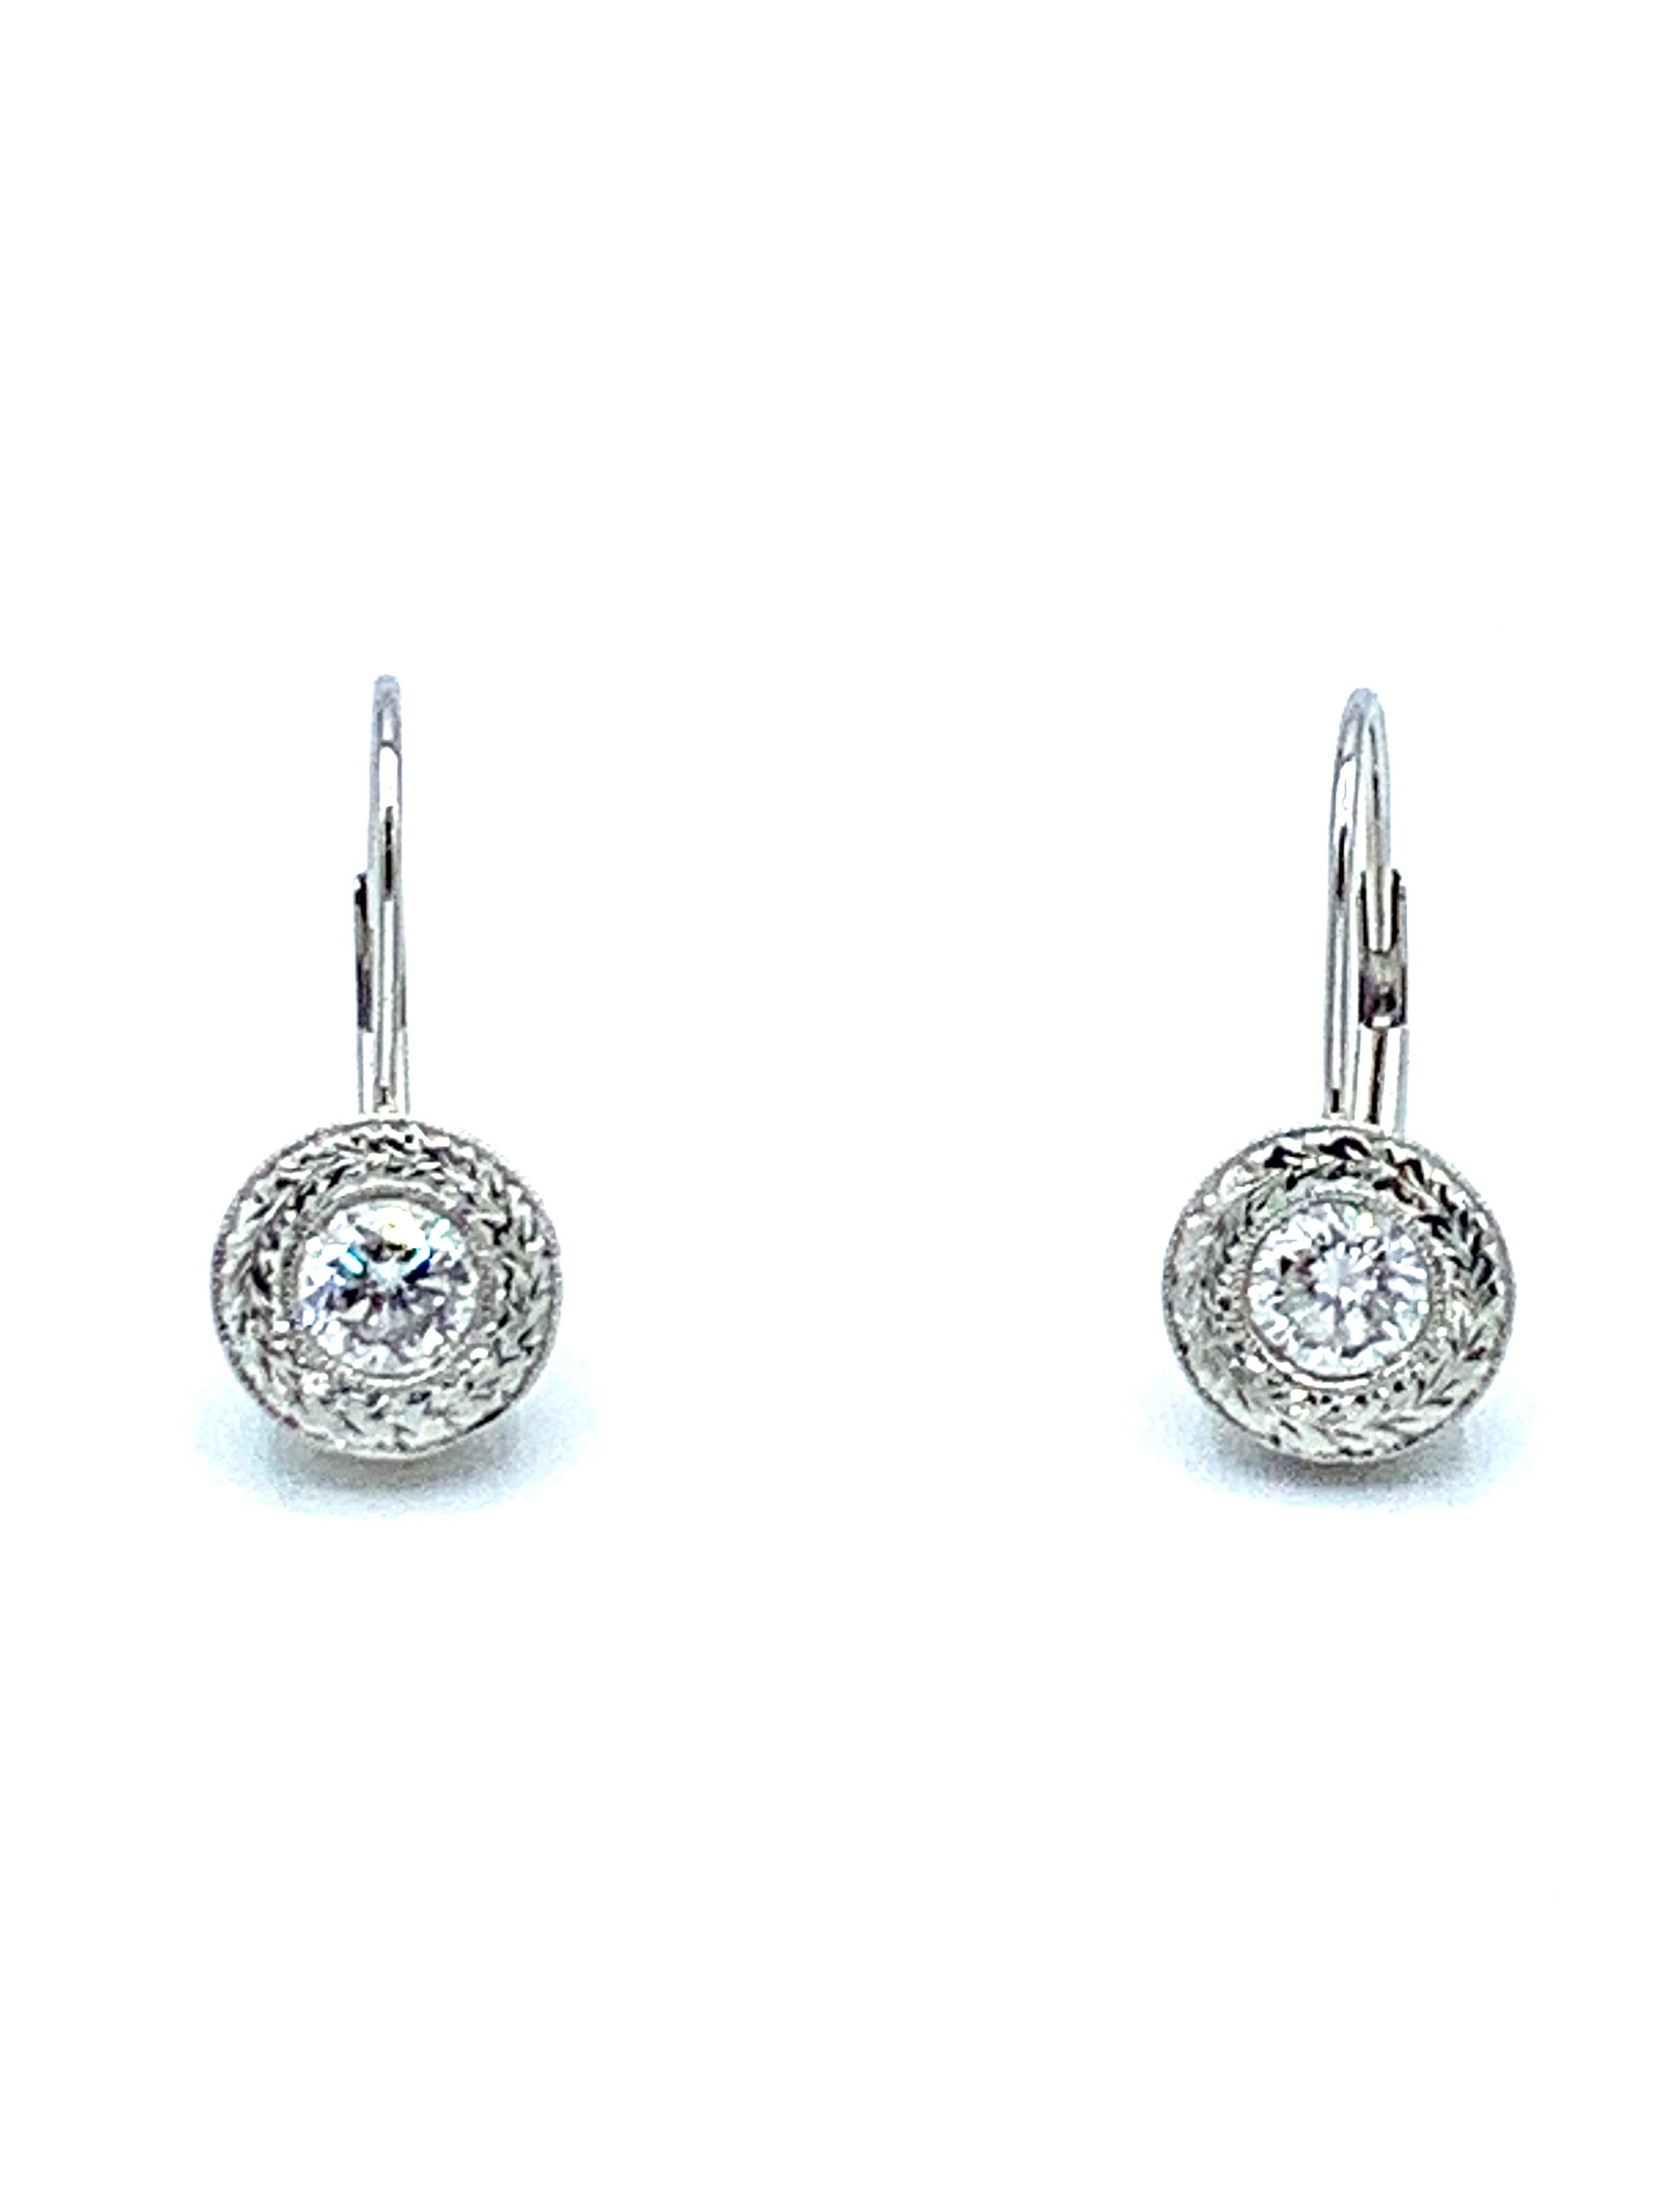 A gorgeous easy to wear pair of earrings!  The 1.00 carat total weight diamonds are bezel set, surrounded by hand engraved metal work, suspended from a curved lever back closure in platinum.  The diamonds are round brilliant cuts, graded as F color,